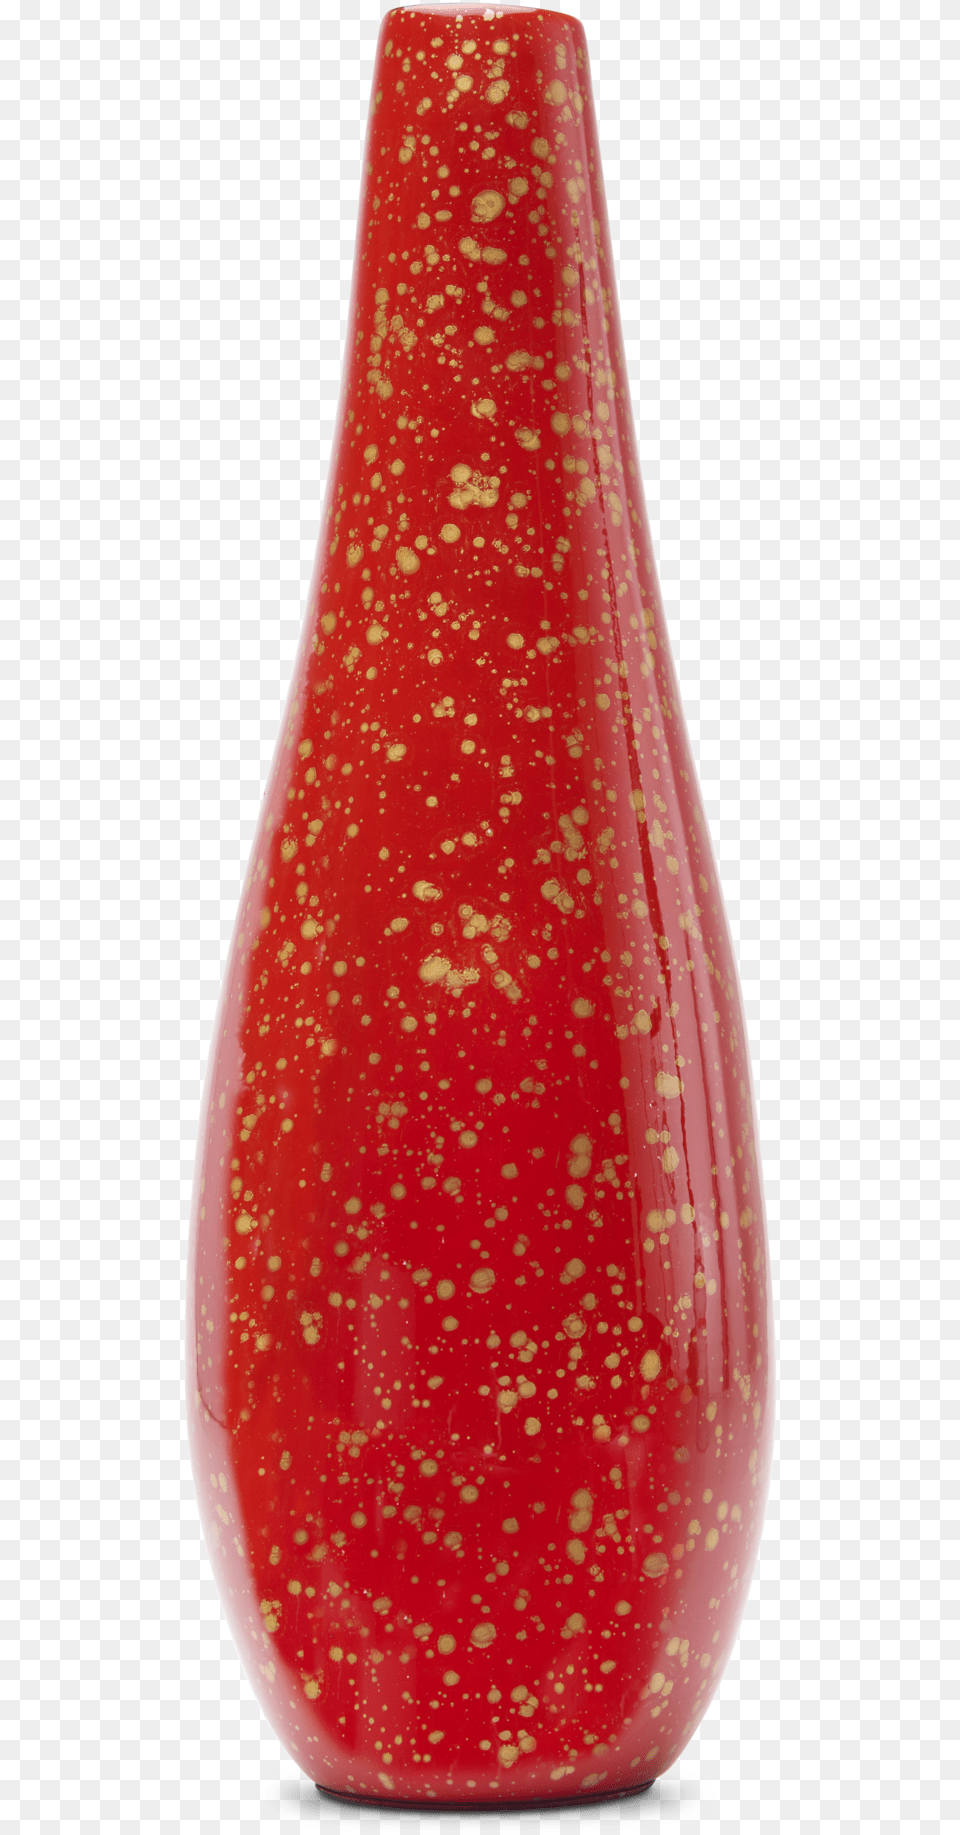 Rust Lacquer Bamboo Vase Vase, Jar, Pottery, Food, Ketchup Free Png